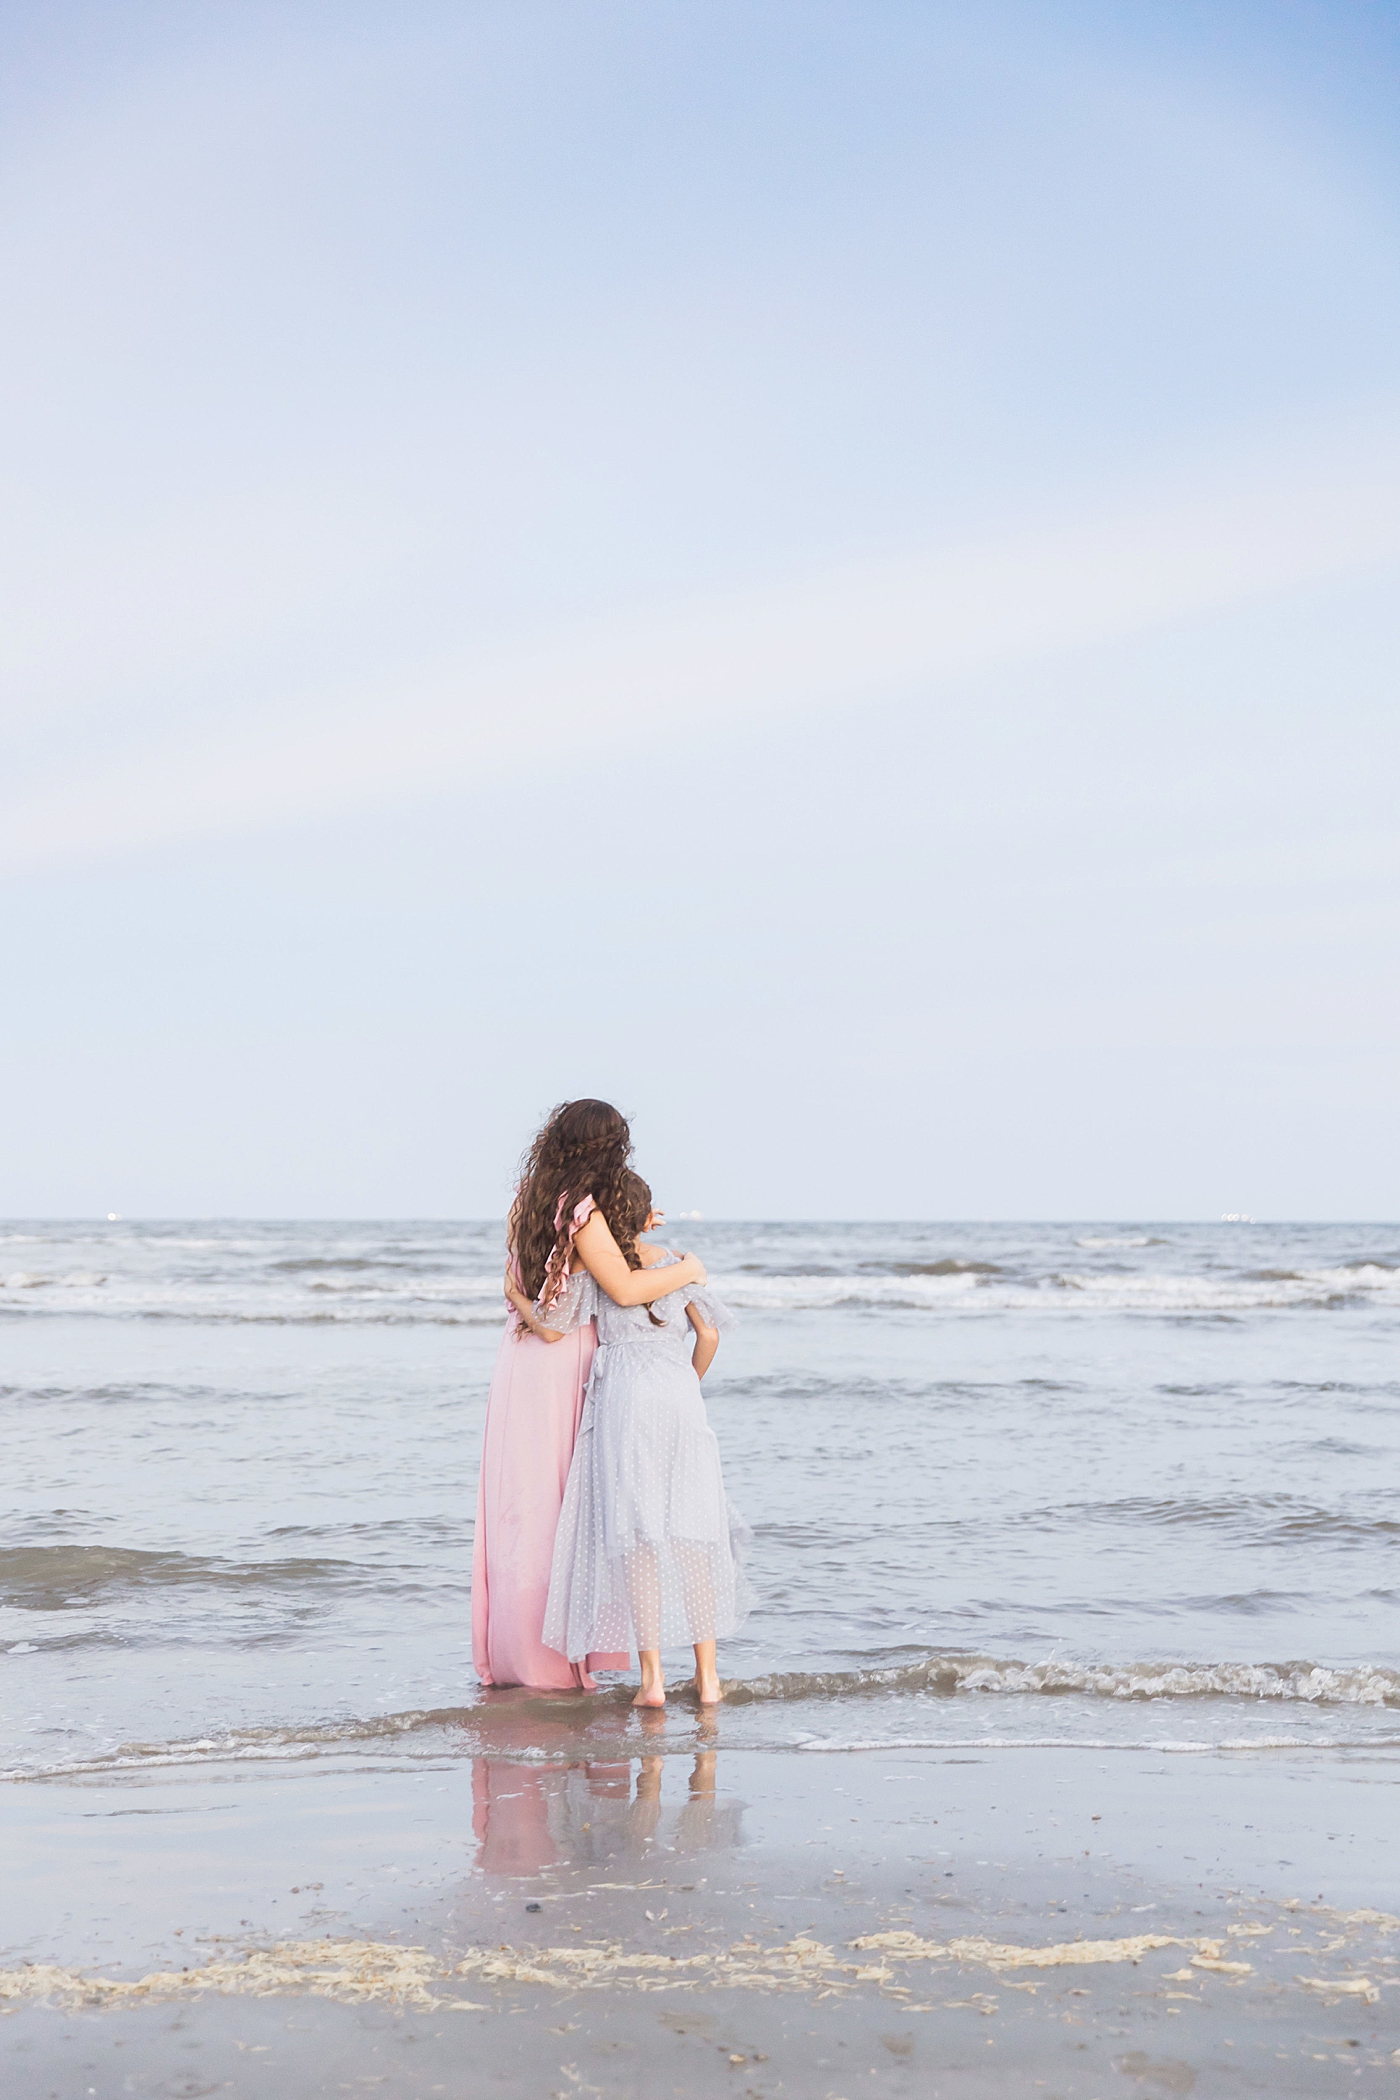 Sisters looking off into the ocean together. Photo by Fresh Light Photography.